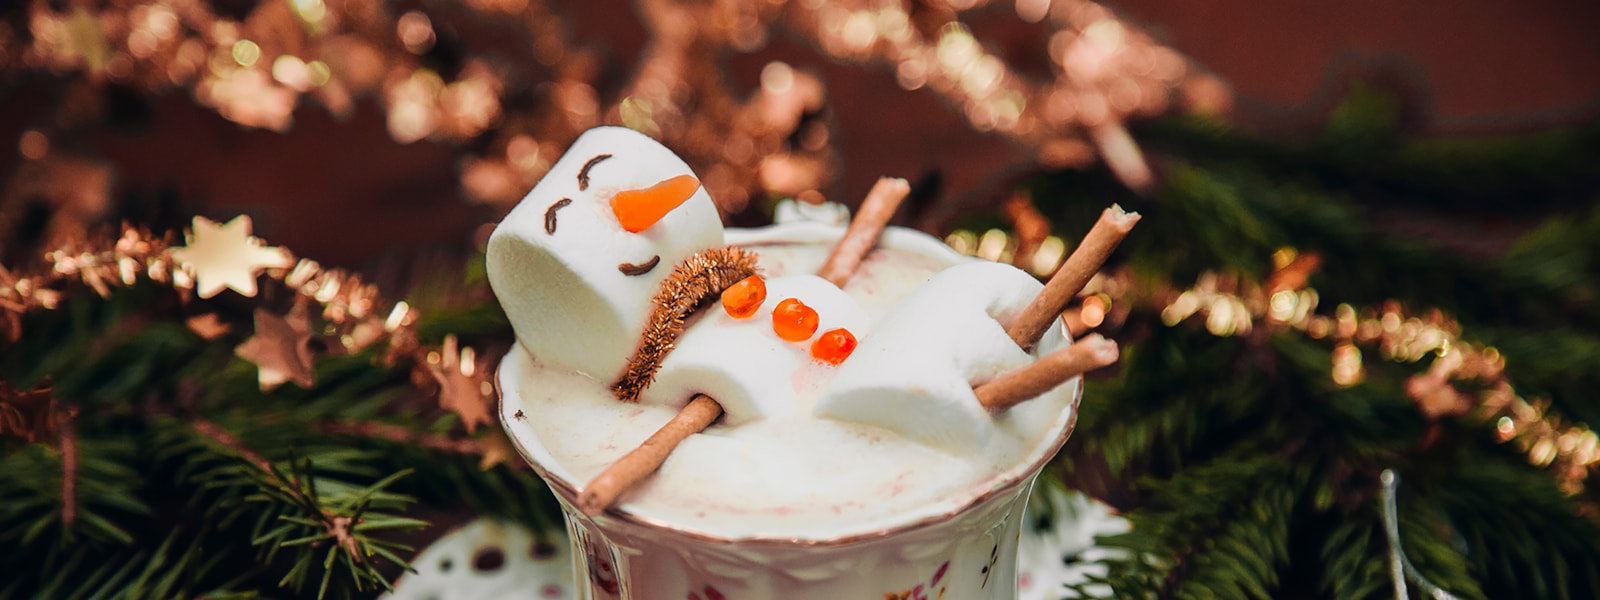 snowman made out of marshmallows floating in a cup of hot cocoa, branches around it 